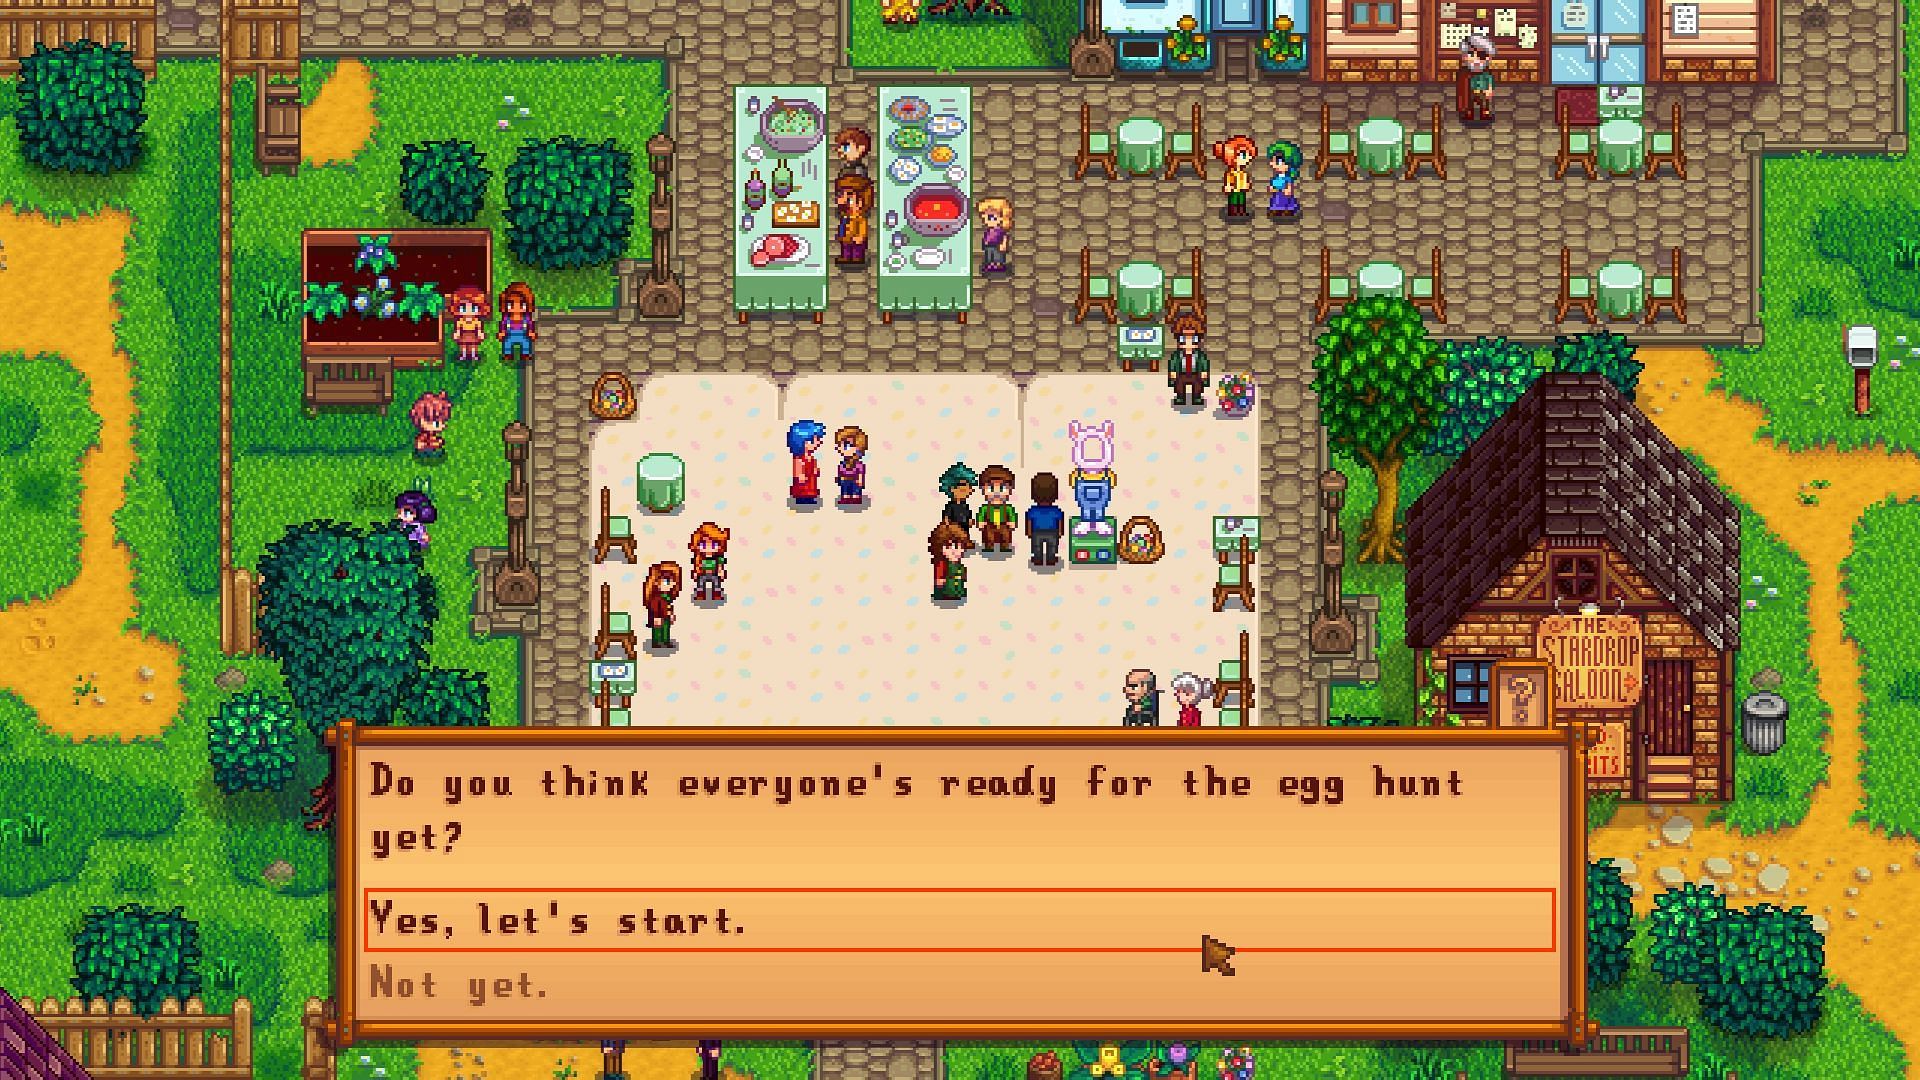 Search for hidden eggs throughout the village. (Image via ConcernedApe)